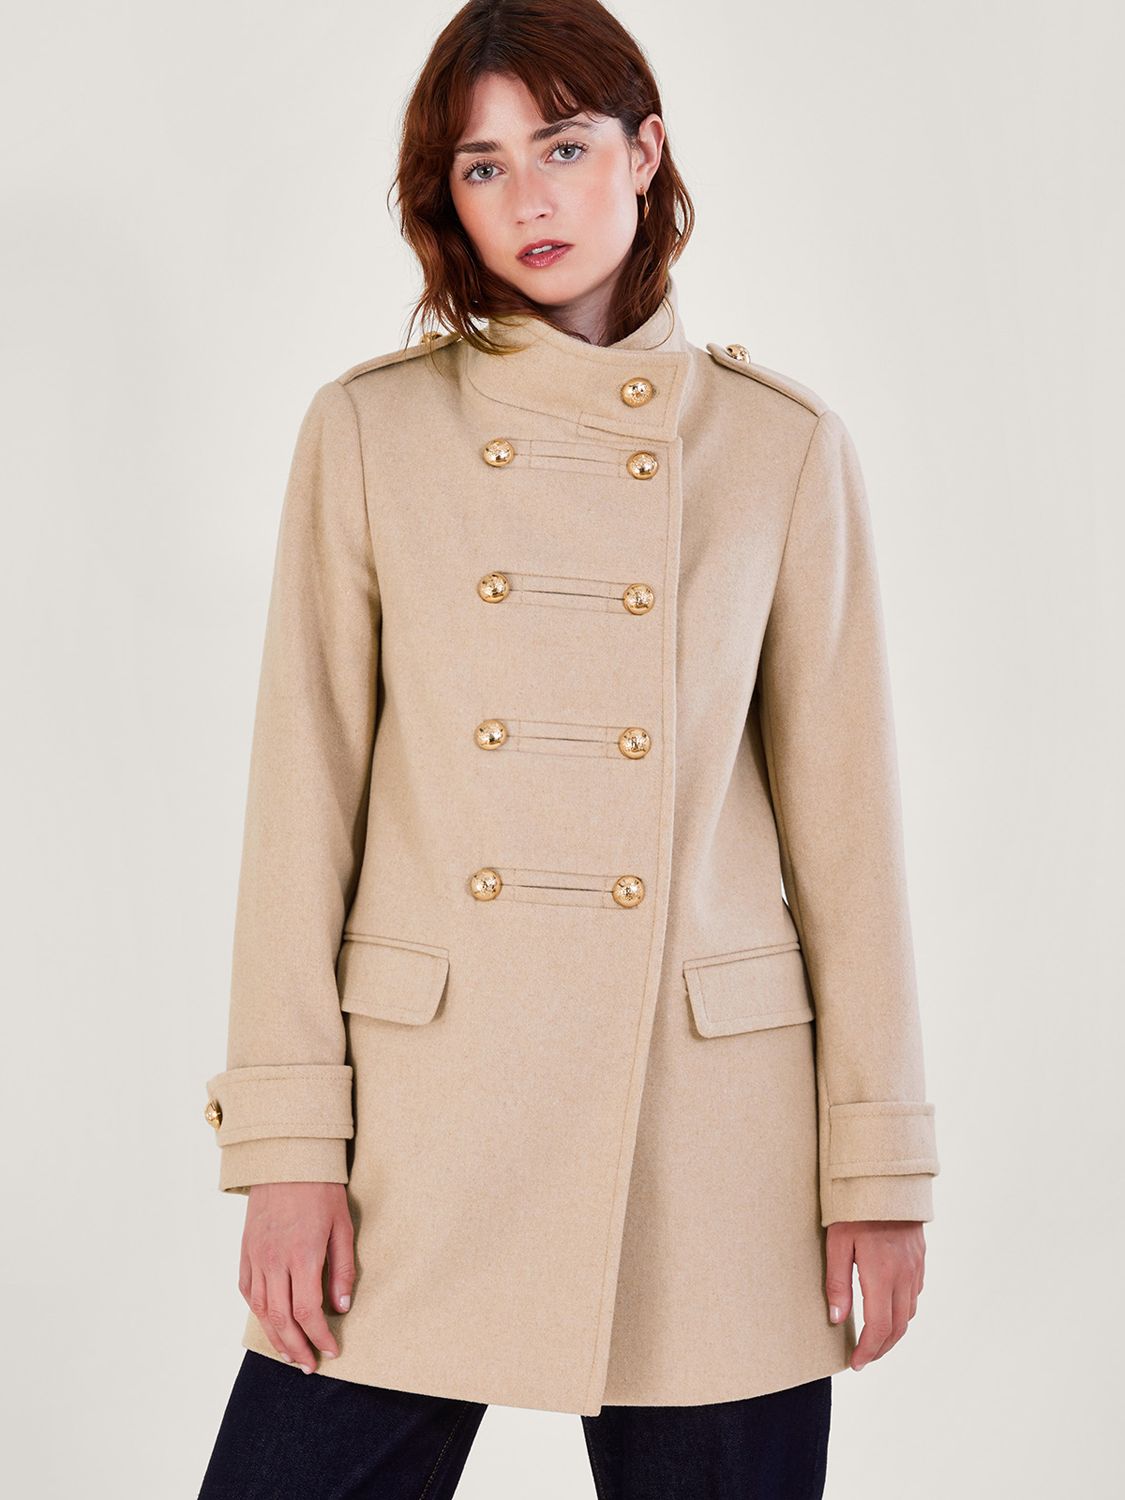 Monsoon Phoebe Double Breasted Pea Coat, Biscuit